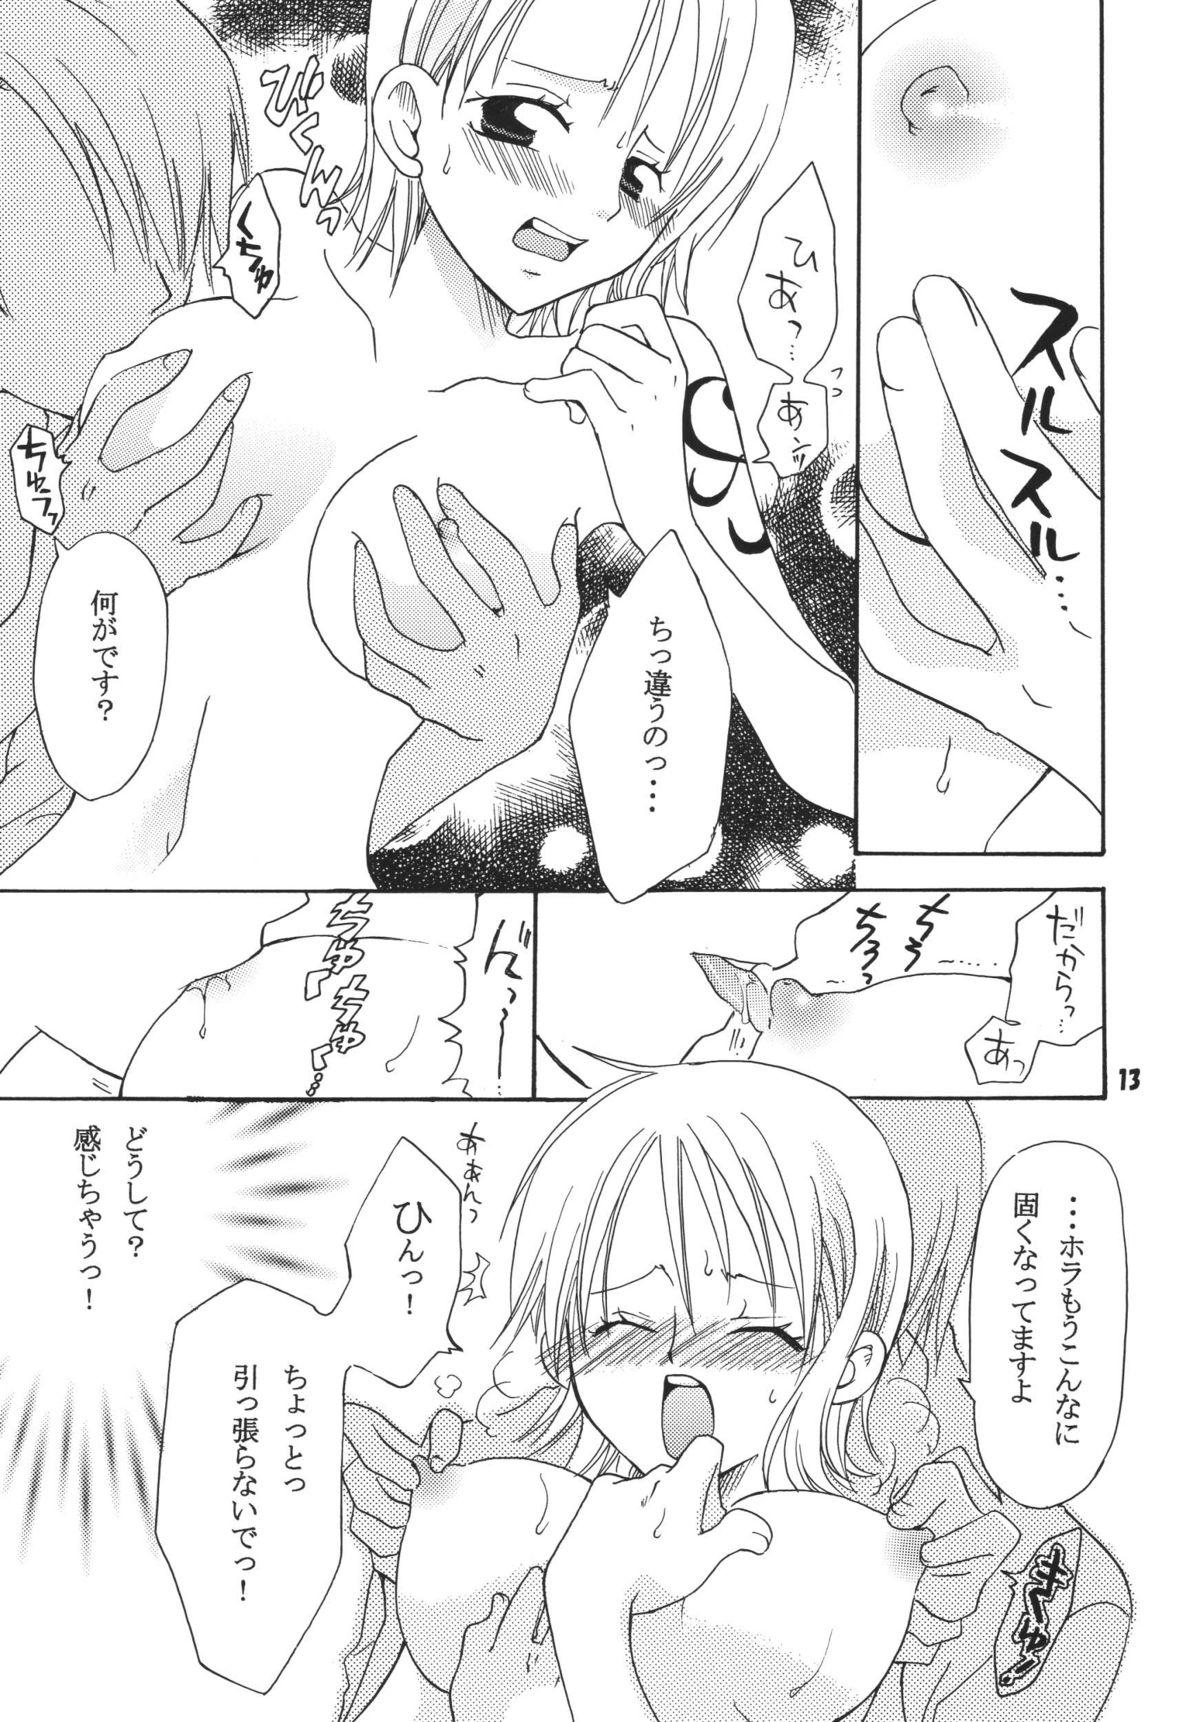 Gay Shorthair Kaizoku Musume. DX - One piece Rope - Page 12